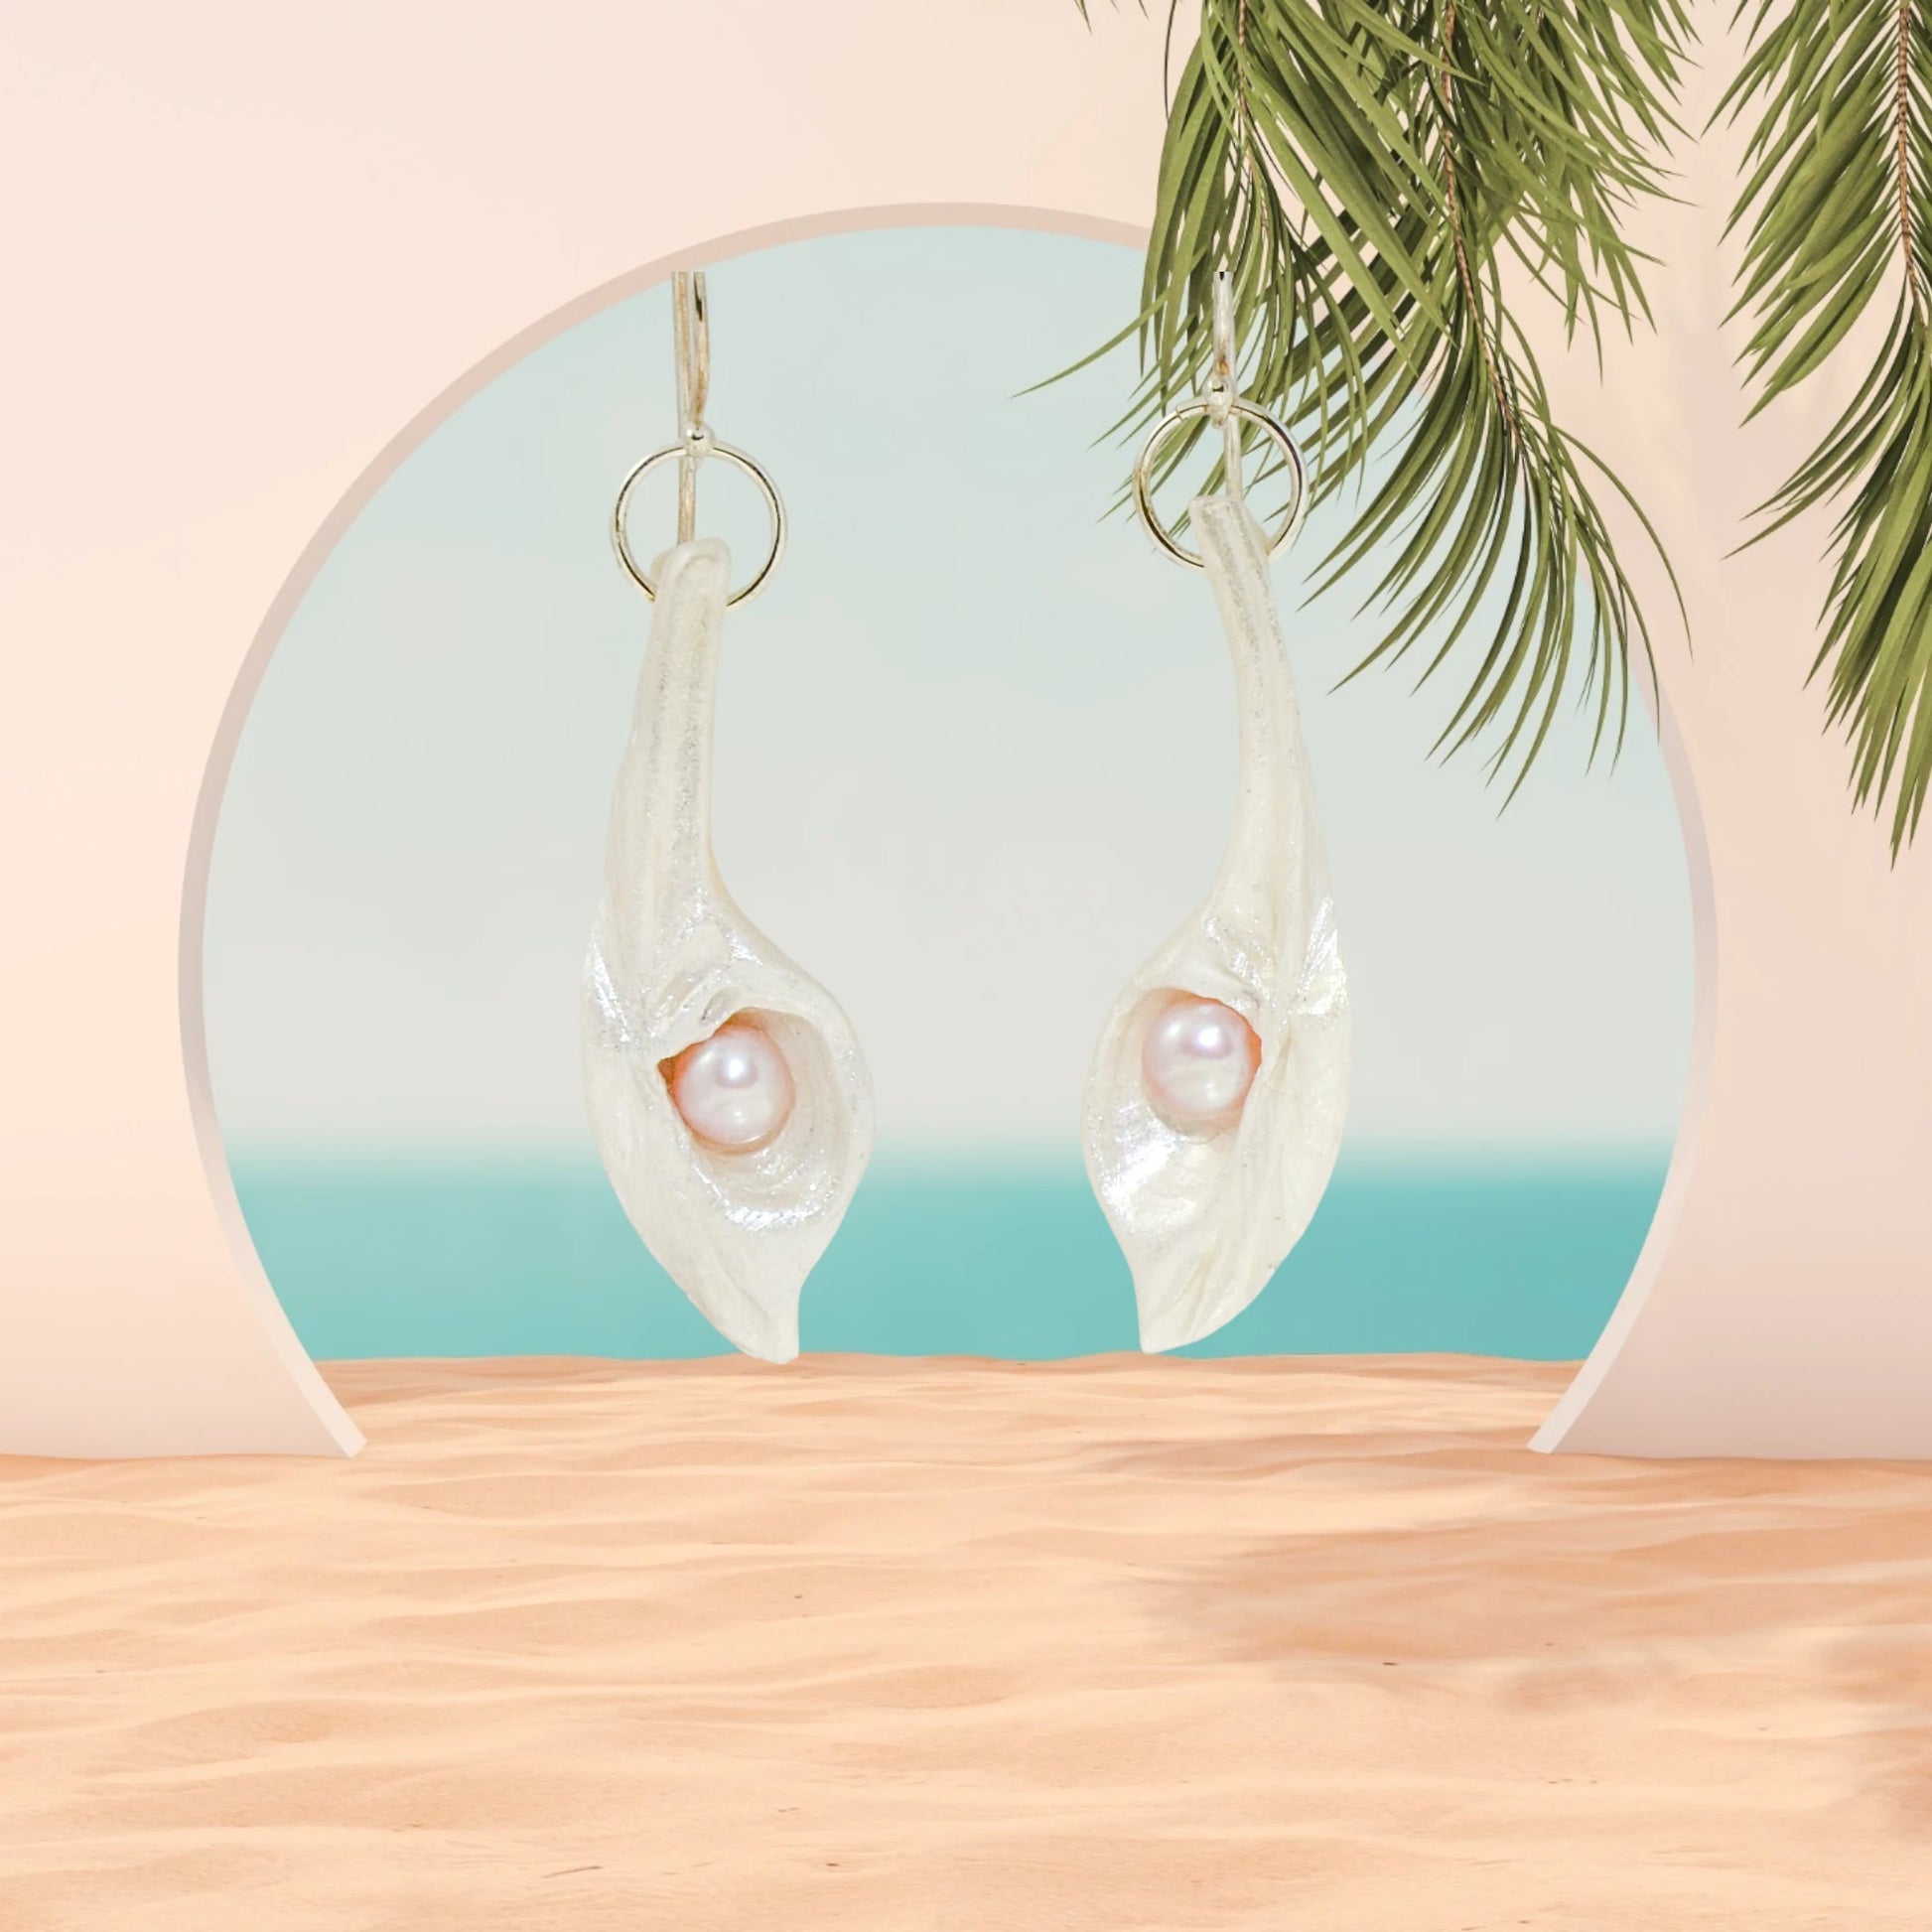 Sea Plume natural seashell earrings with real pink freshwater pearls. The earrings are hanging in an archway leading to the ocean.